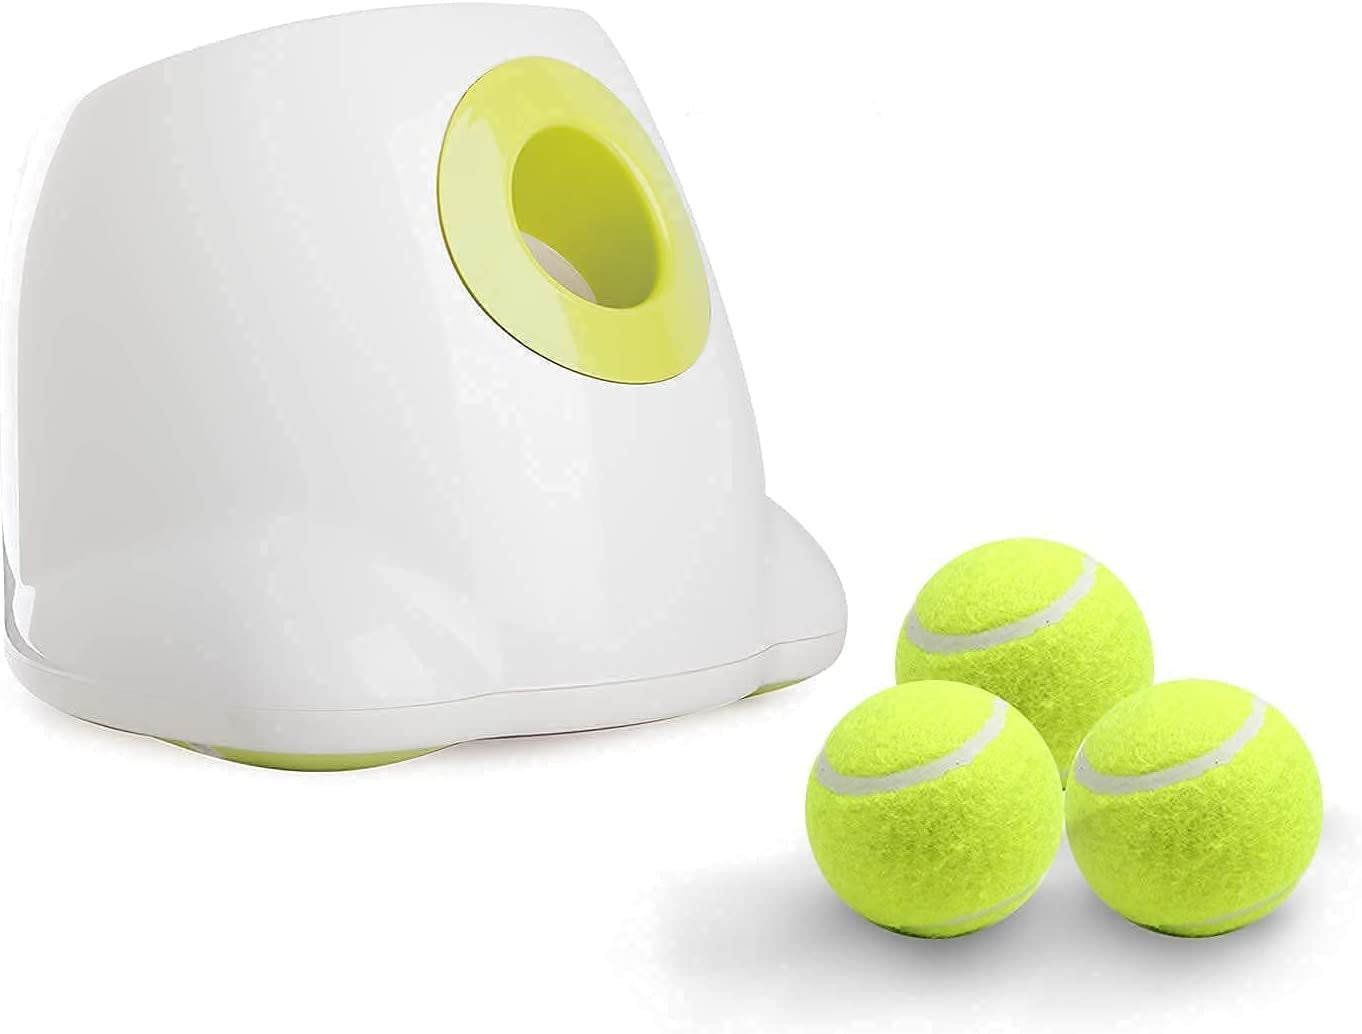 Dog Automatic Ball Launcher for Small and Medium Dogs - 3 Balls Included